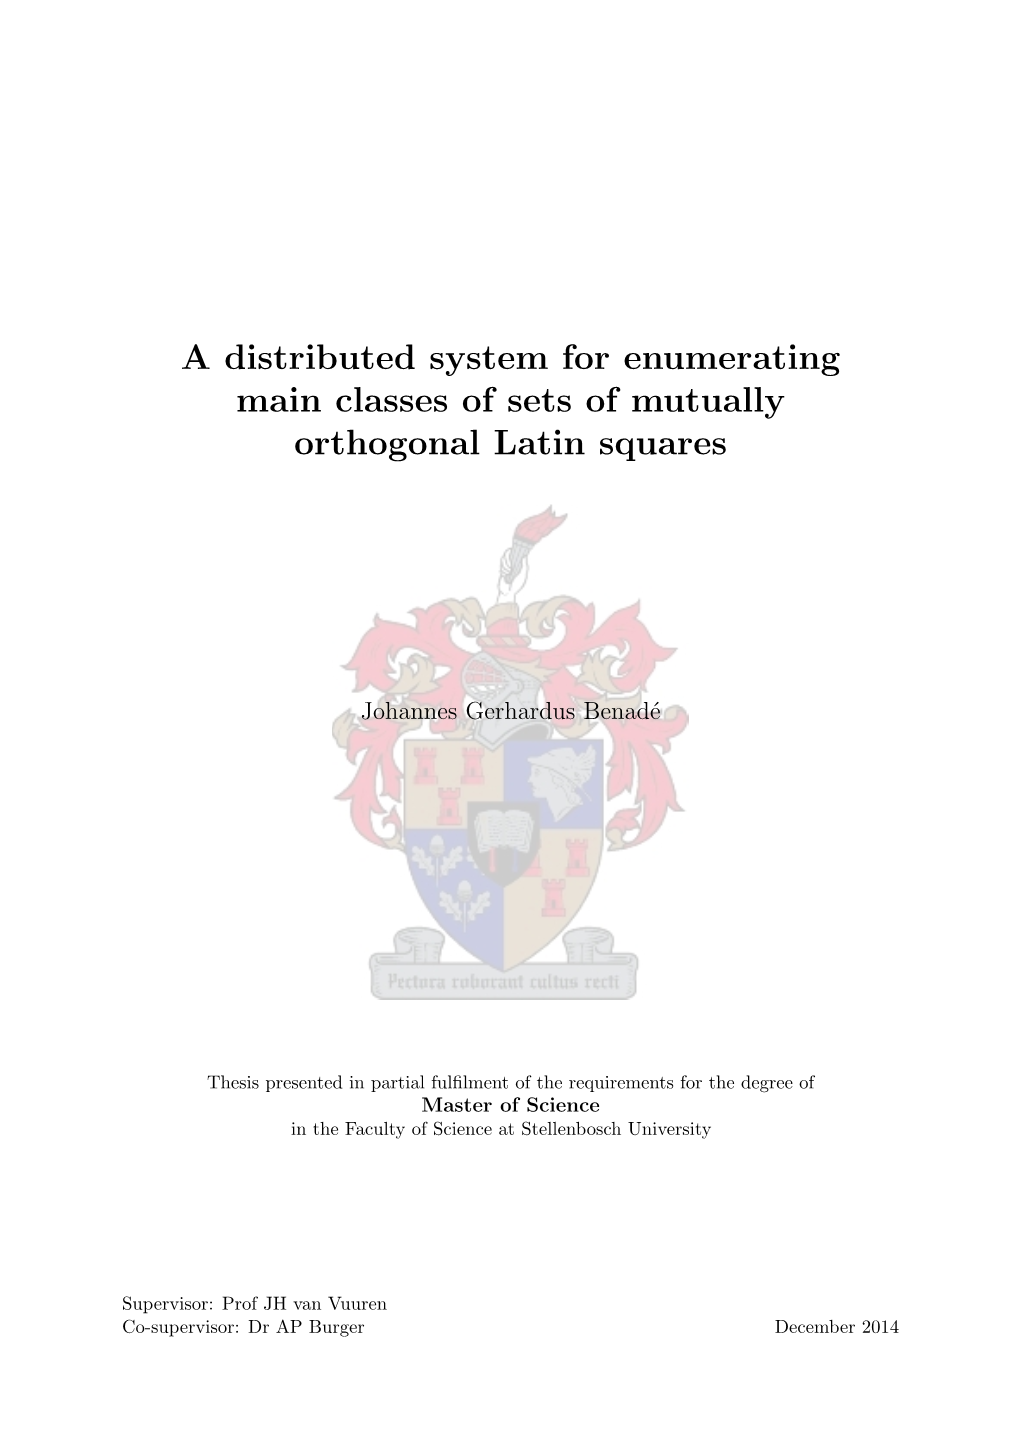 A Distributed System for Enumerating Main Classes of Sets of Mutually Orthogonal Latin Squares